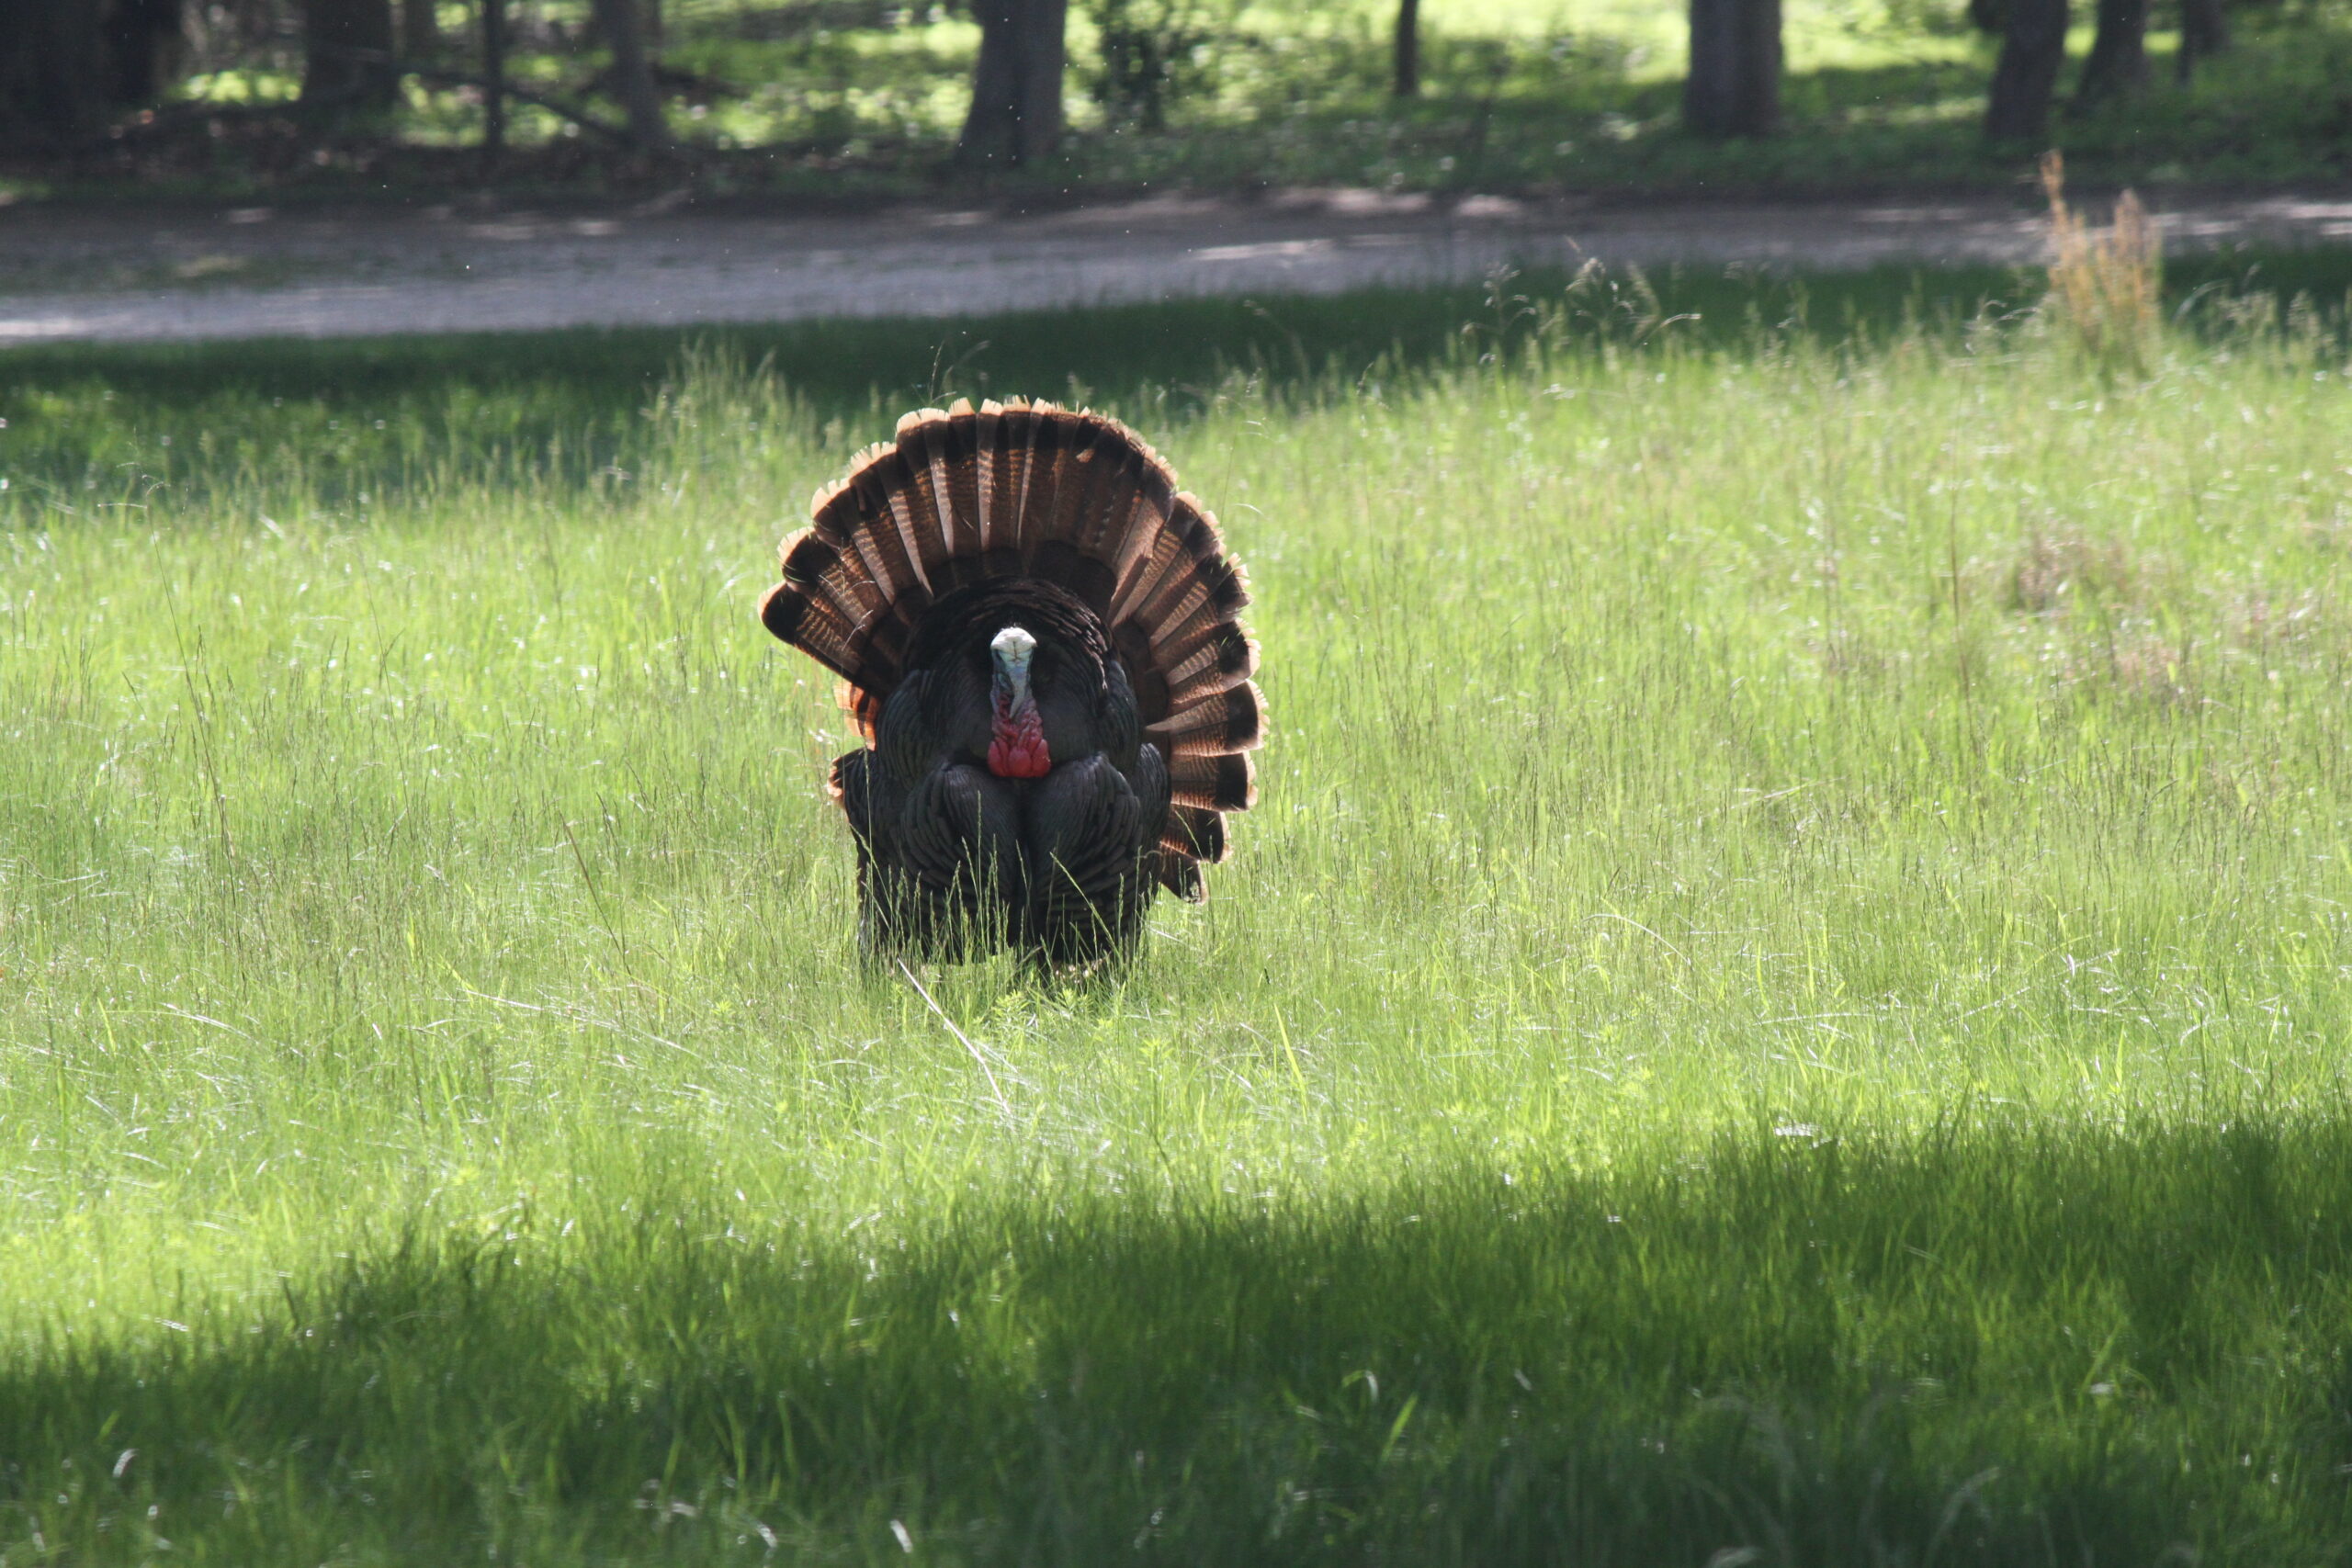 There will be a spring turkey hunting season on Long Island for the first time this year, but East Hampton Town officials are reticent to allow hunting on public lands, in part due to fears of safety hazards threatening the health and safety of the growing numbers of residents on the South Fork in May. 
Michael Wright Photo